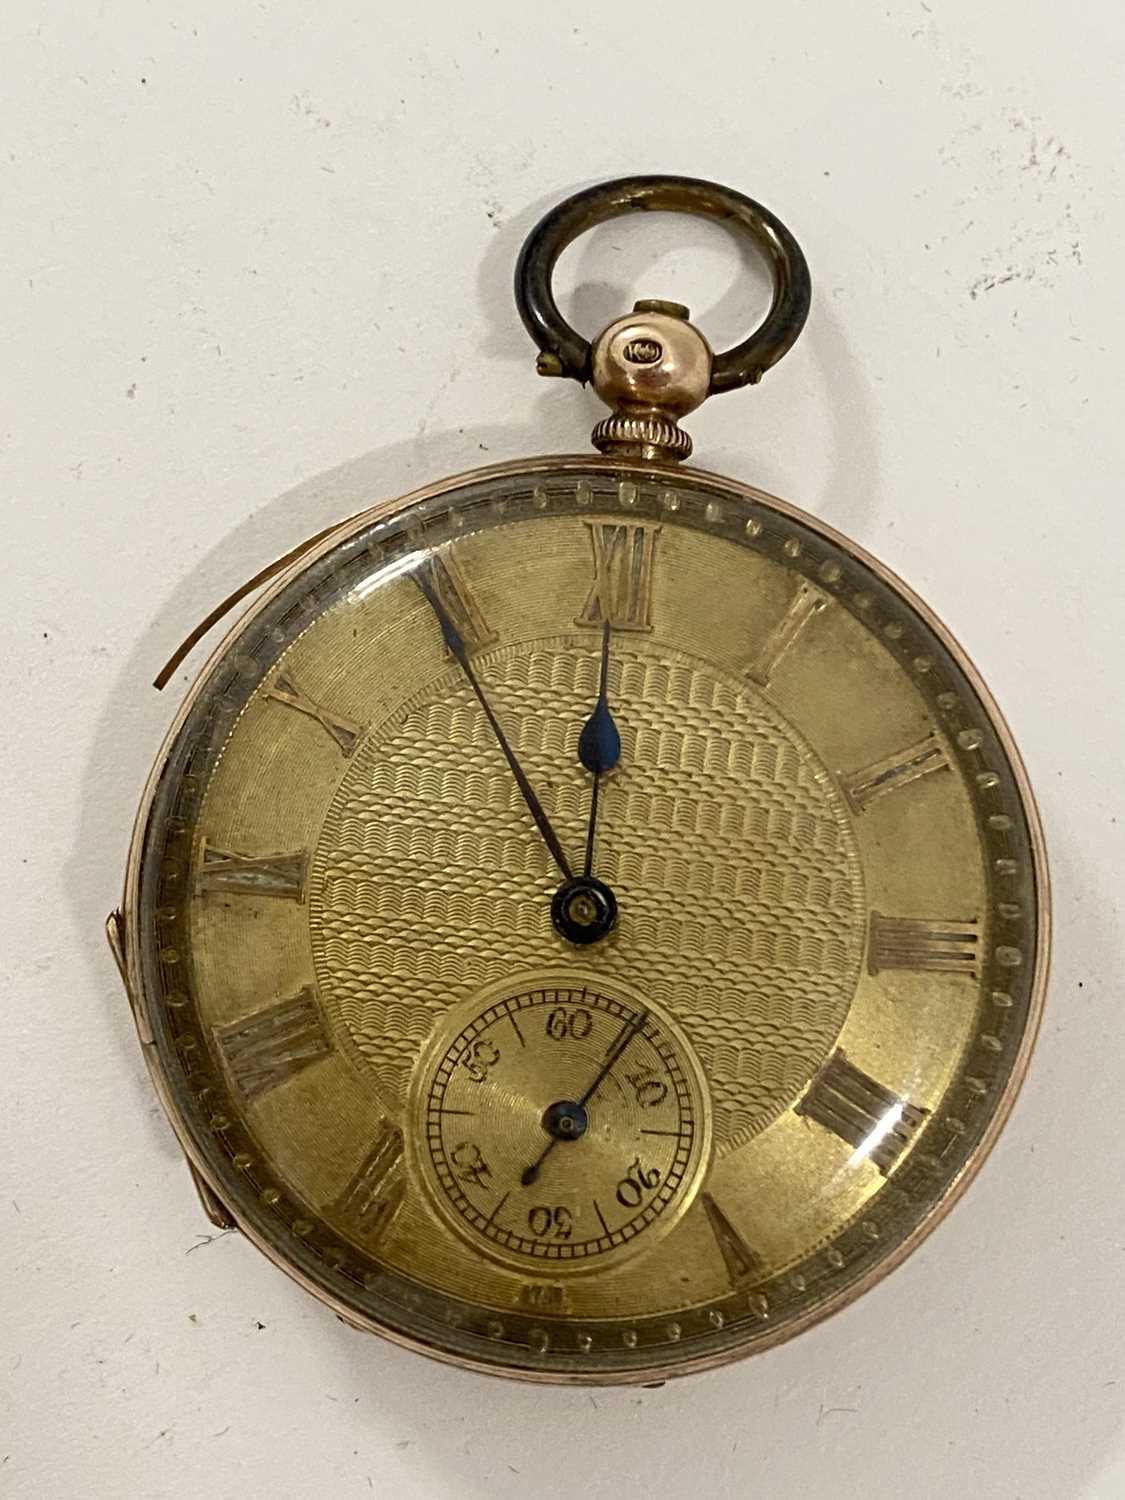 A continental ladies pocket watch, the hinged case marked to the interior Warranted Fine 9 Carat,